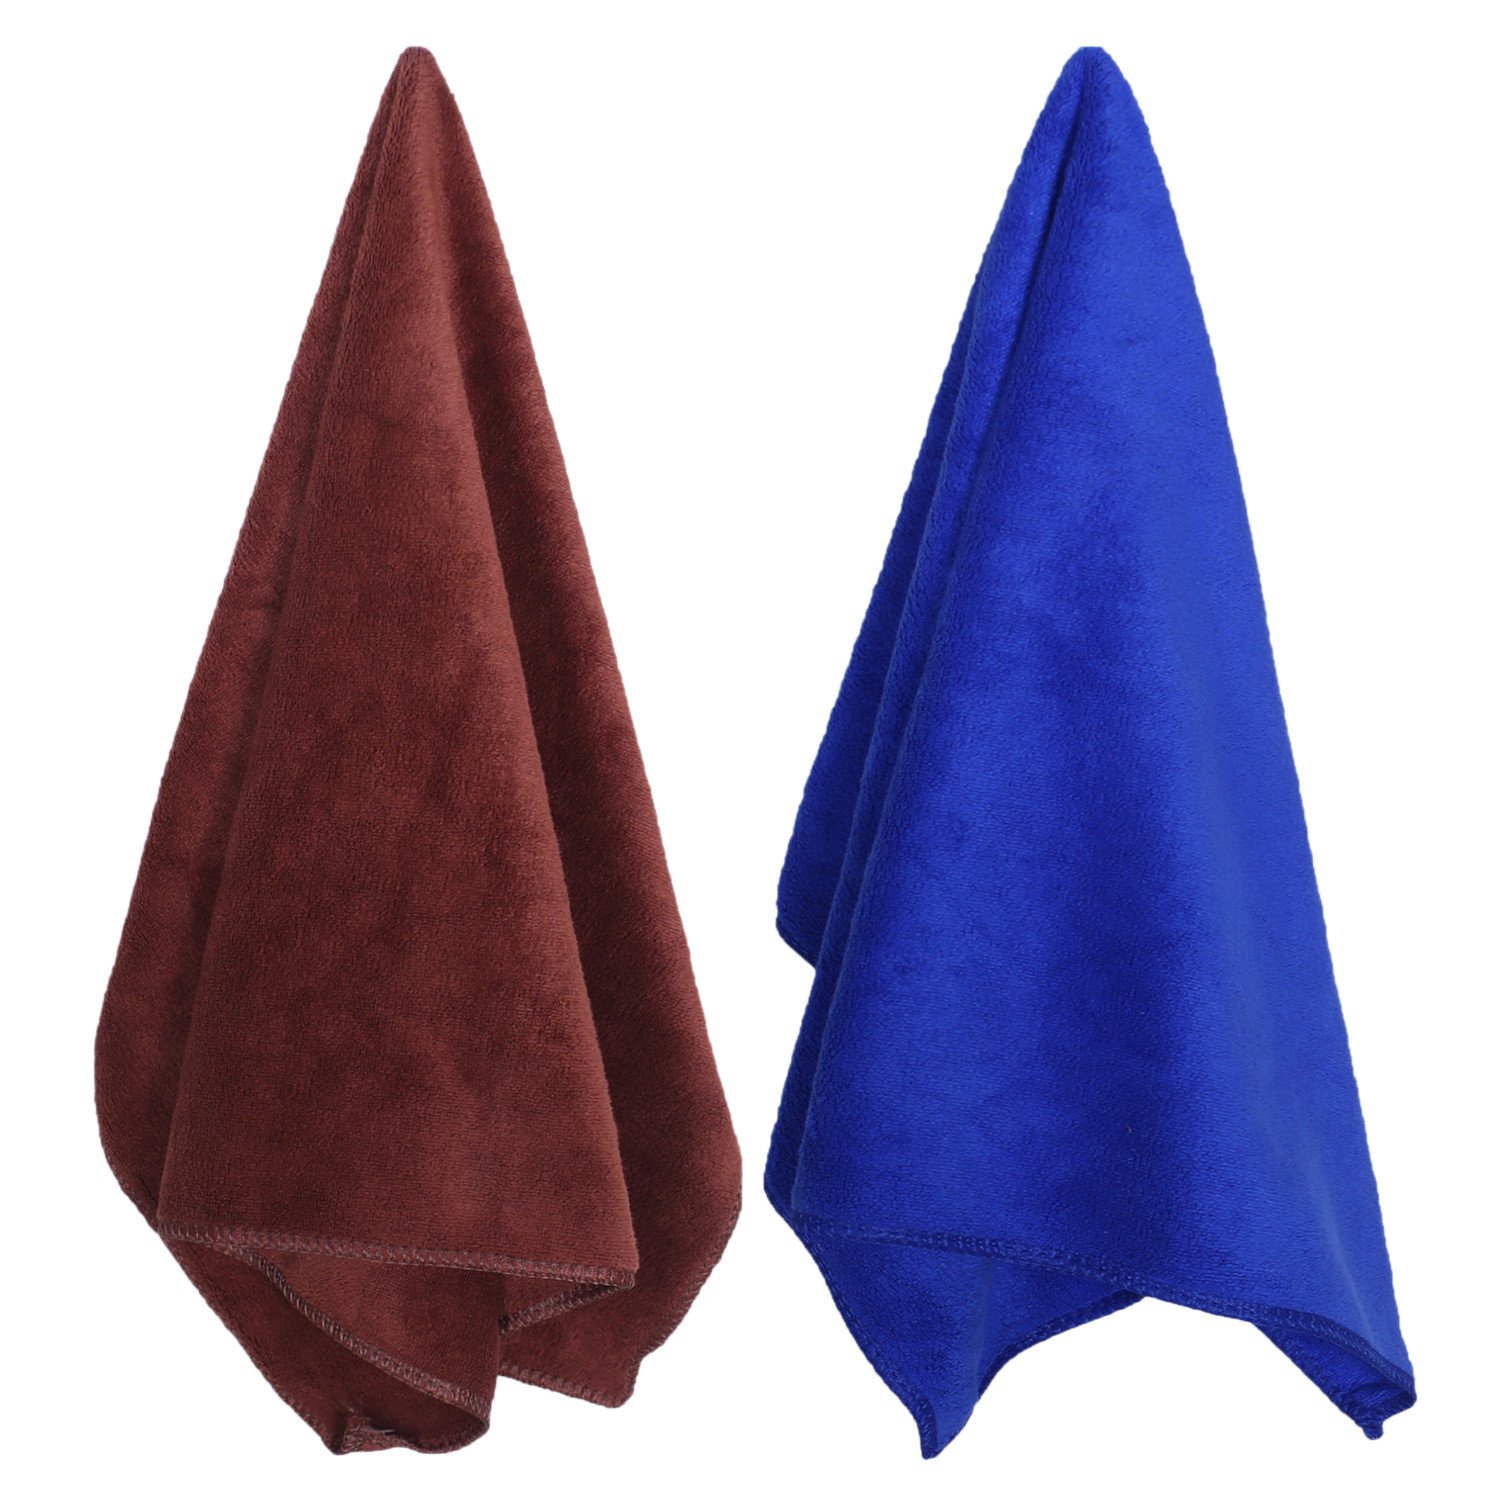 Kuber Industries Cleaning Cloths|Microfiber Highly Absorbent Wash Towels for Kitchen,Car,Window,24 x 16 Inch,Pack of 2 (Brown & Blue)